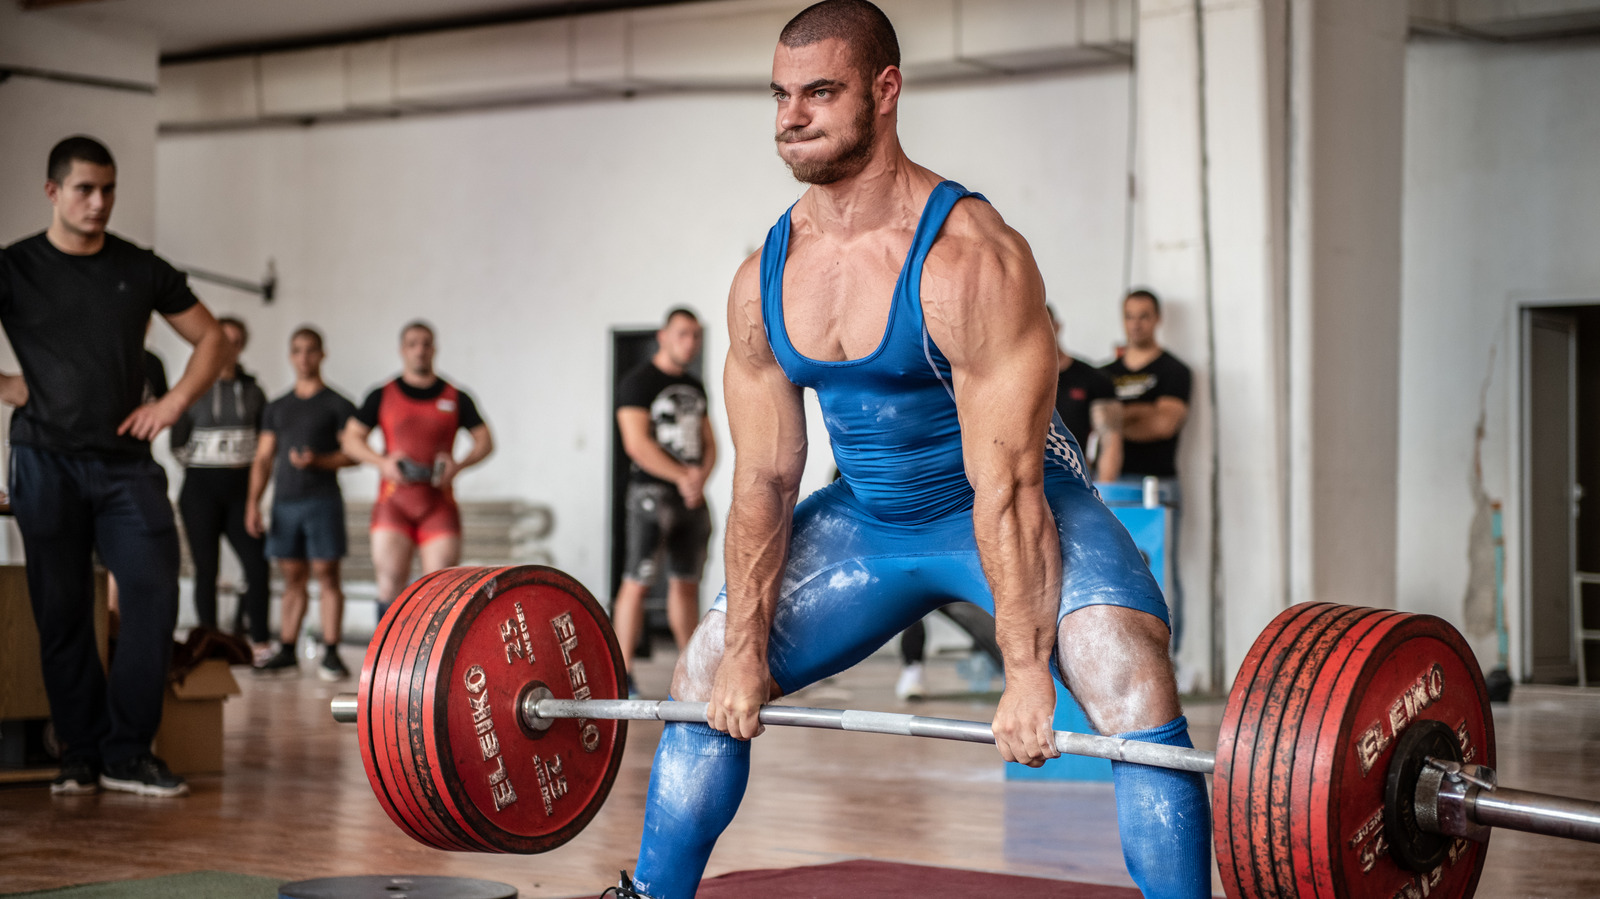 Powerlifting is different from bodybuilding